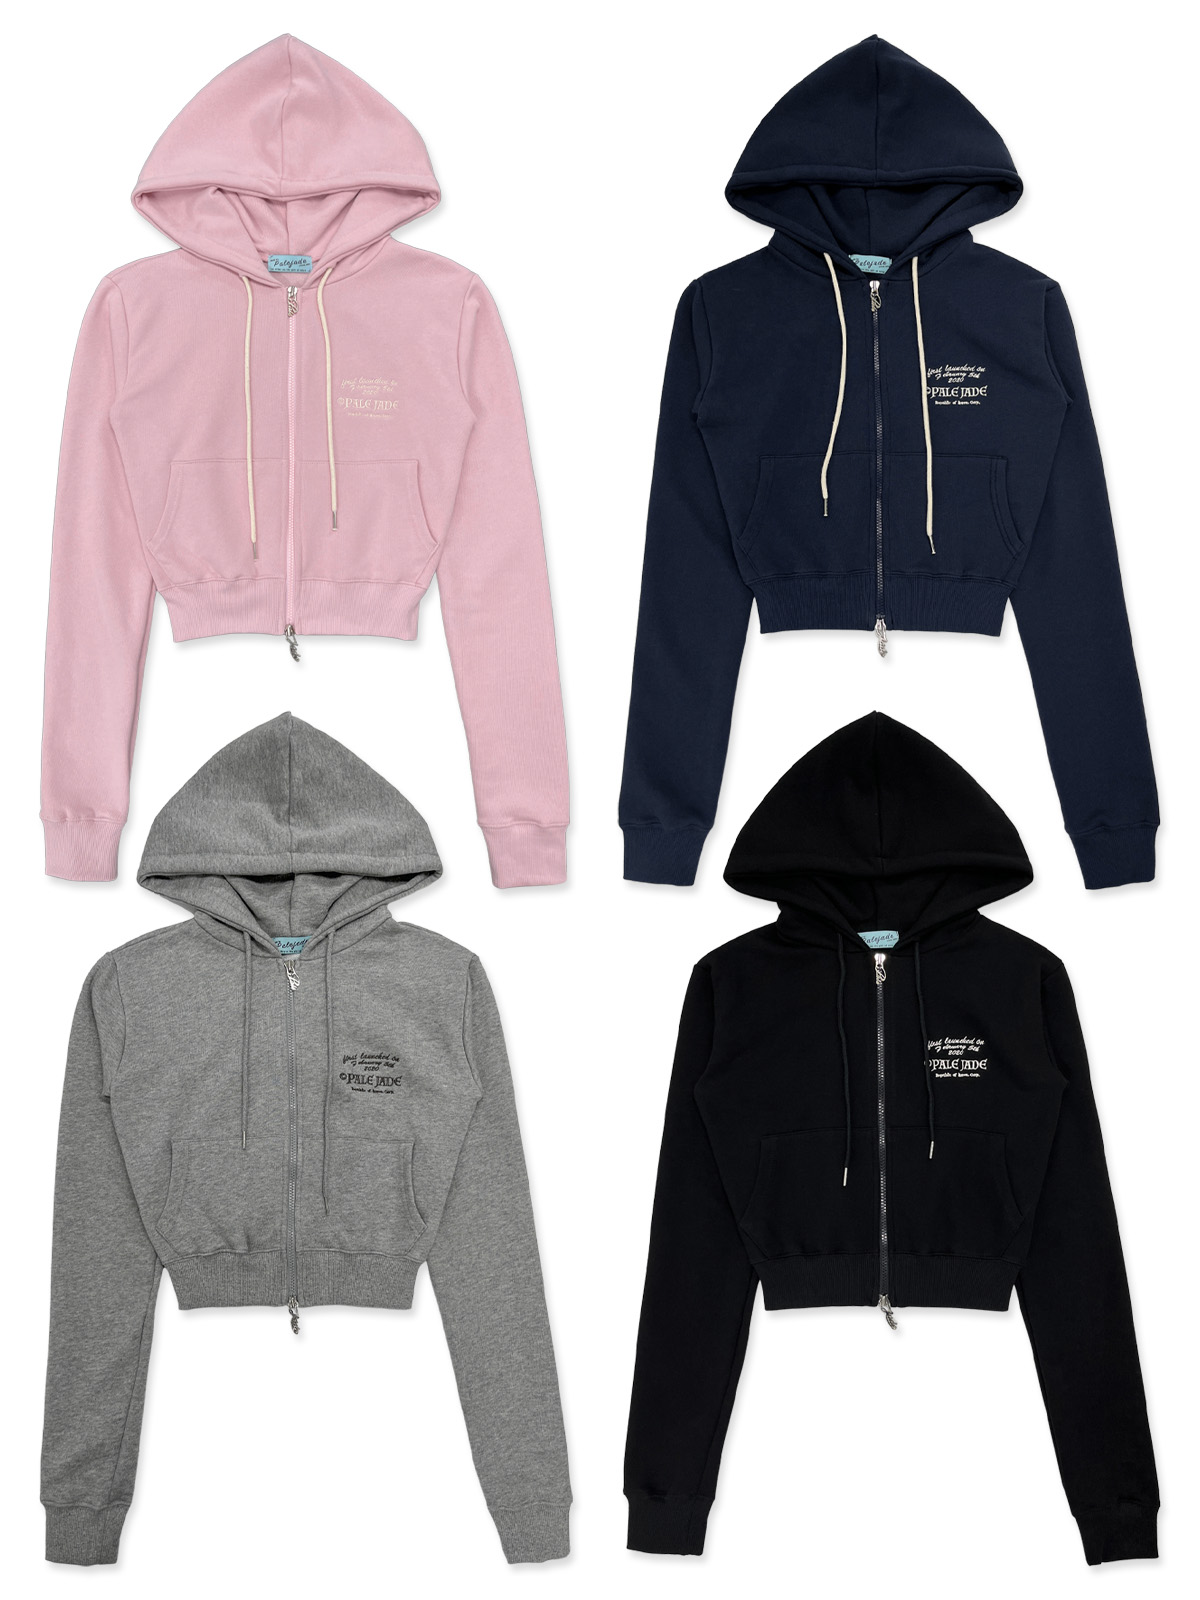 No Fuzzy Training Hooded Zip-Up